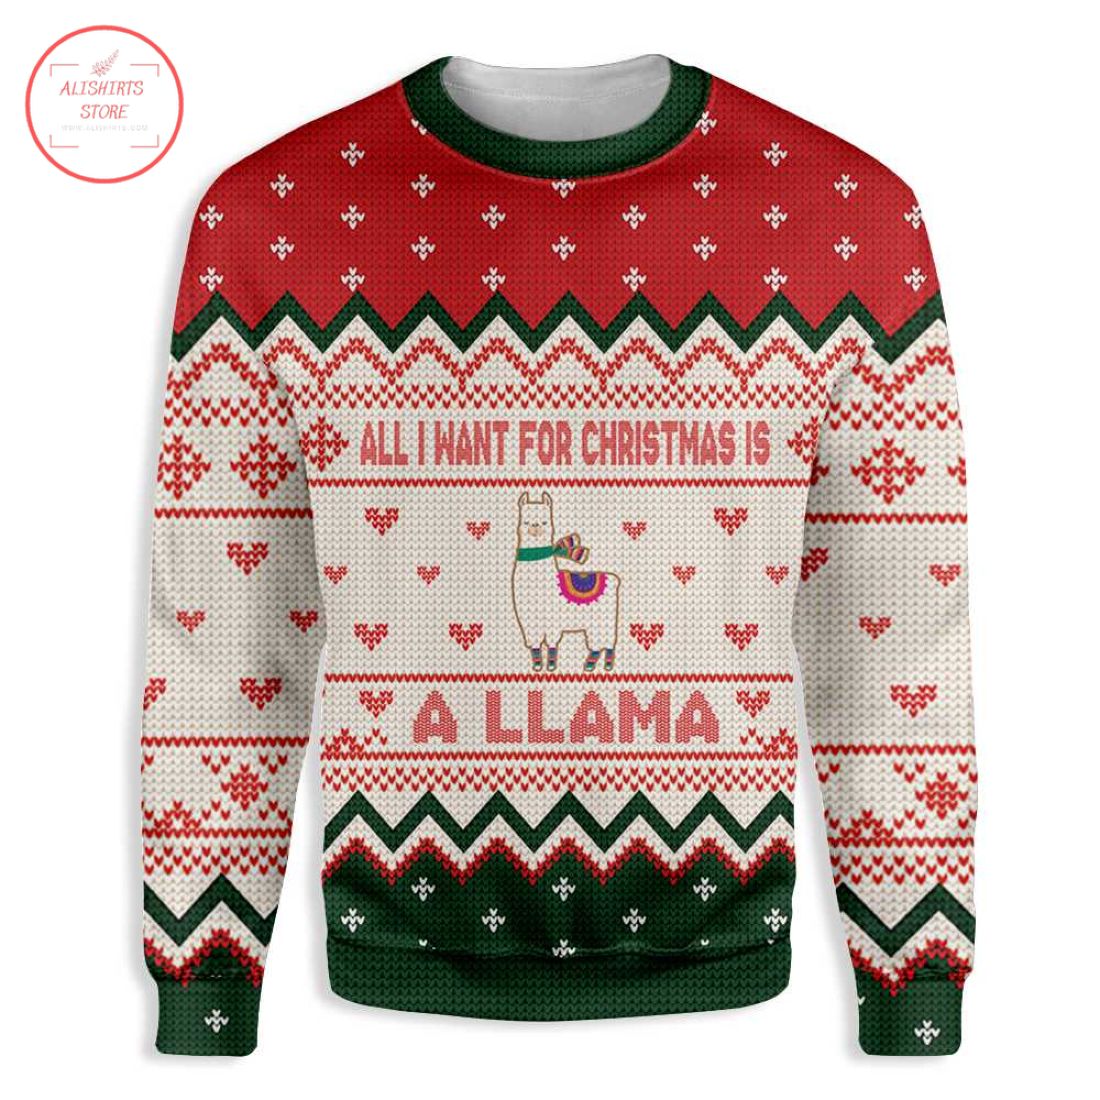 All I want for Christmas is a Llama Christmas Sweater